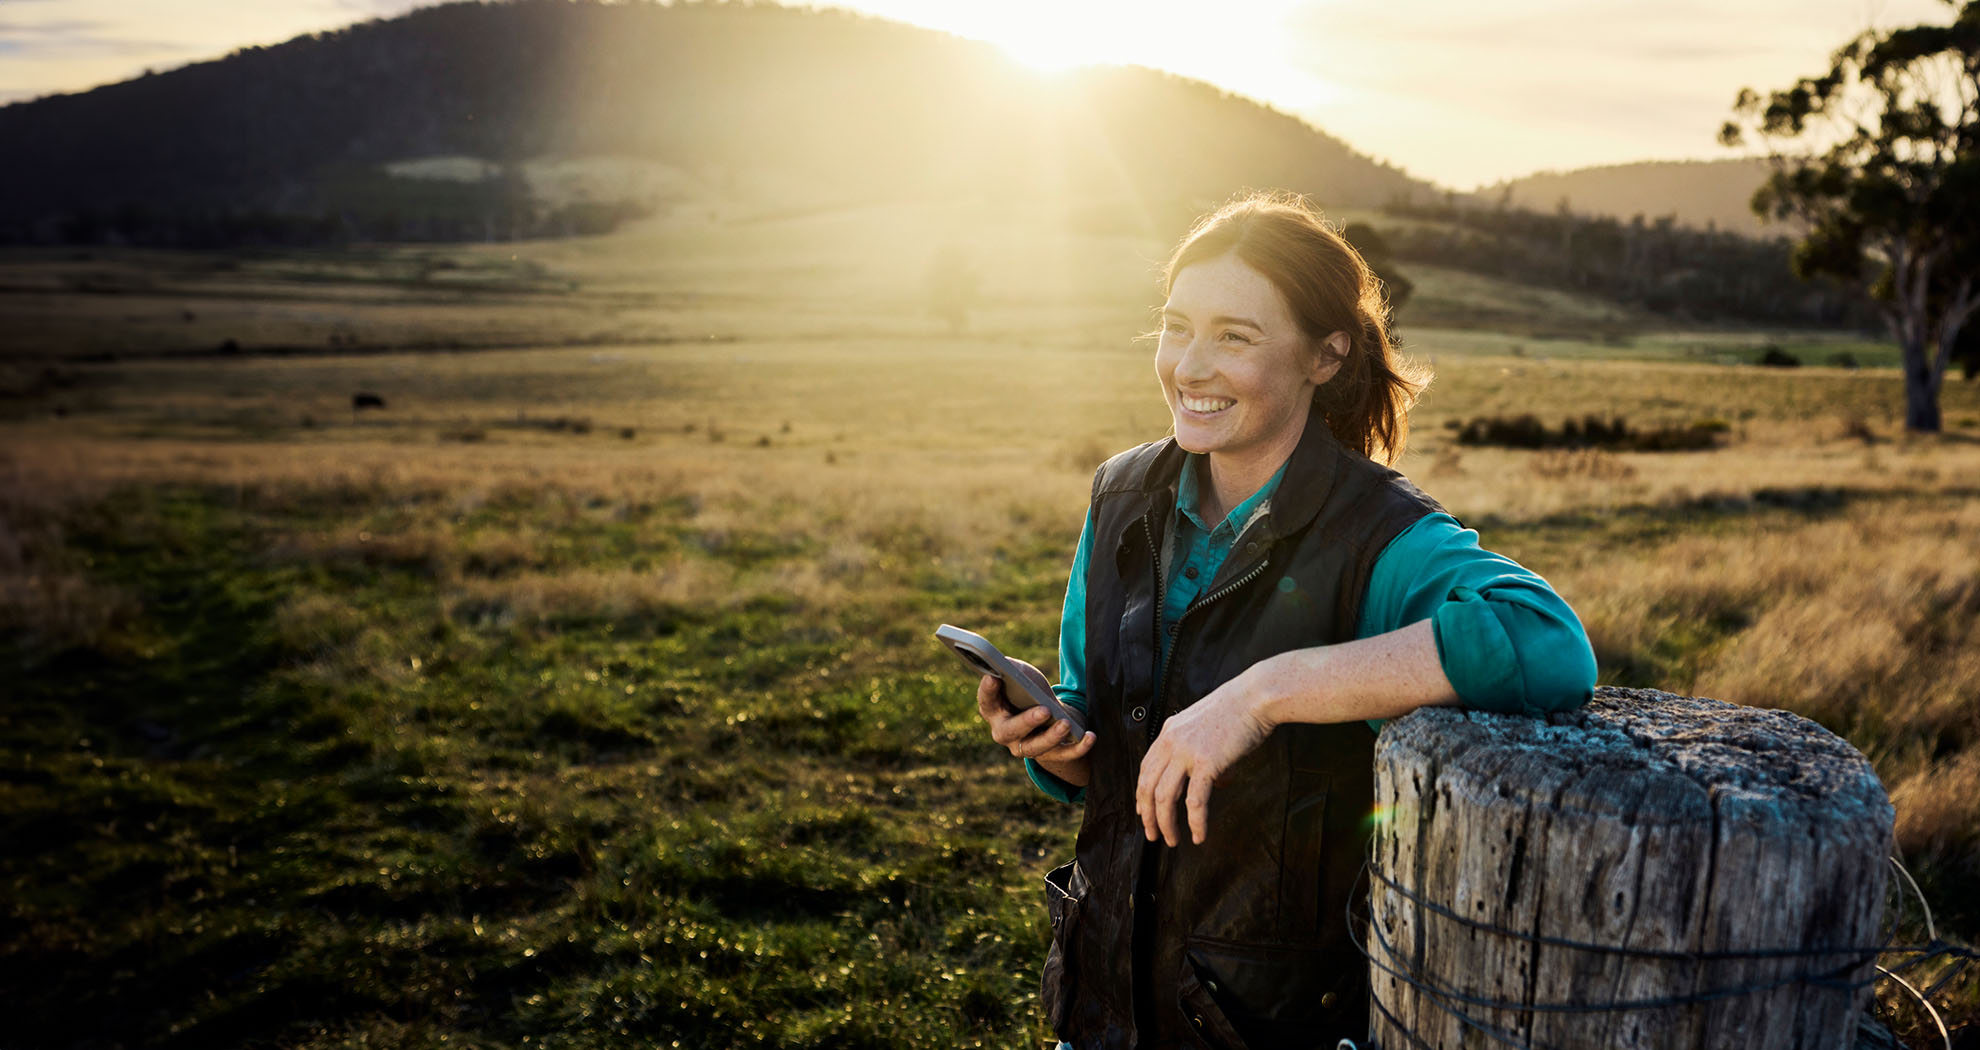 Woman smiling in a field holding her phone